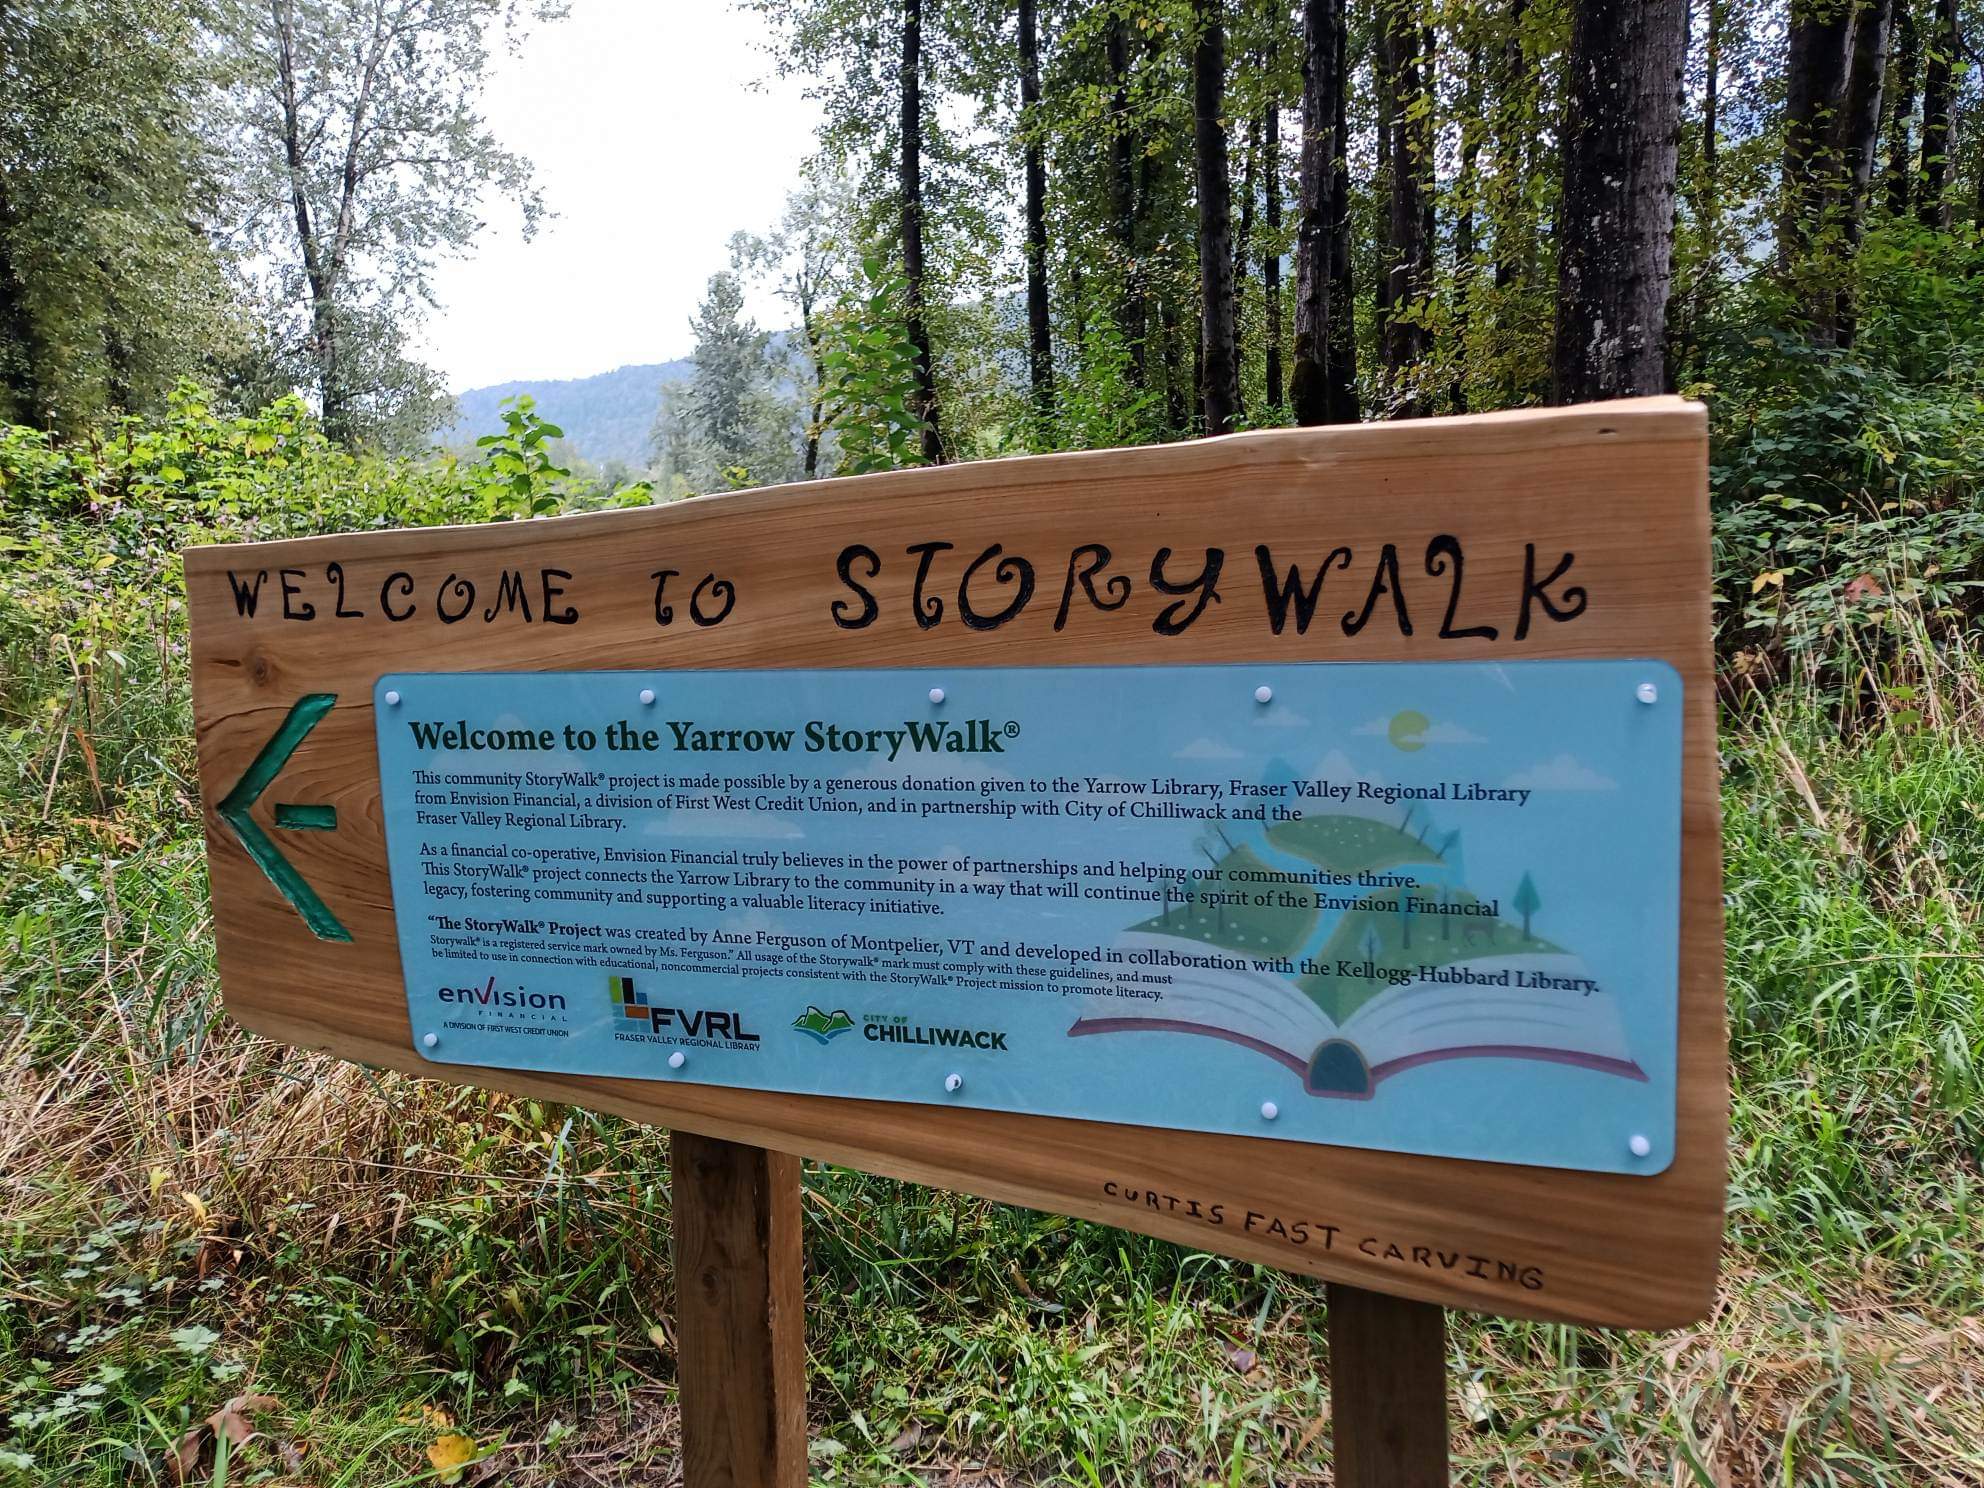 A wooden "Welcome to StoryWalk" sign with an arrow pointing left